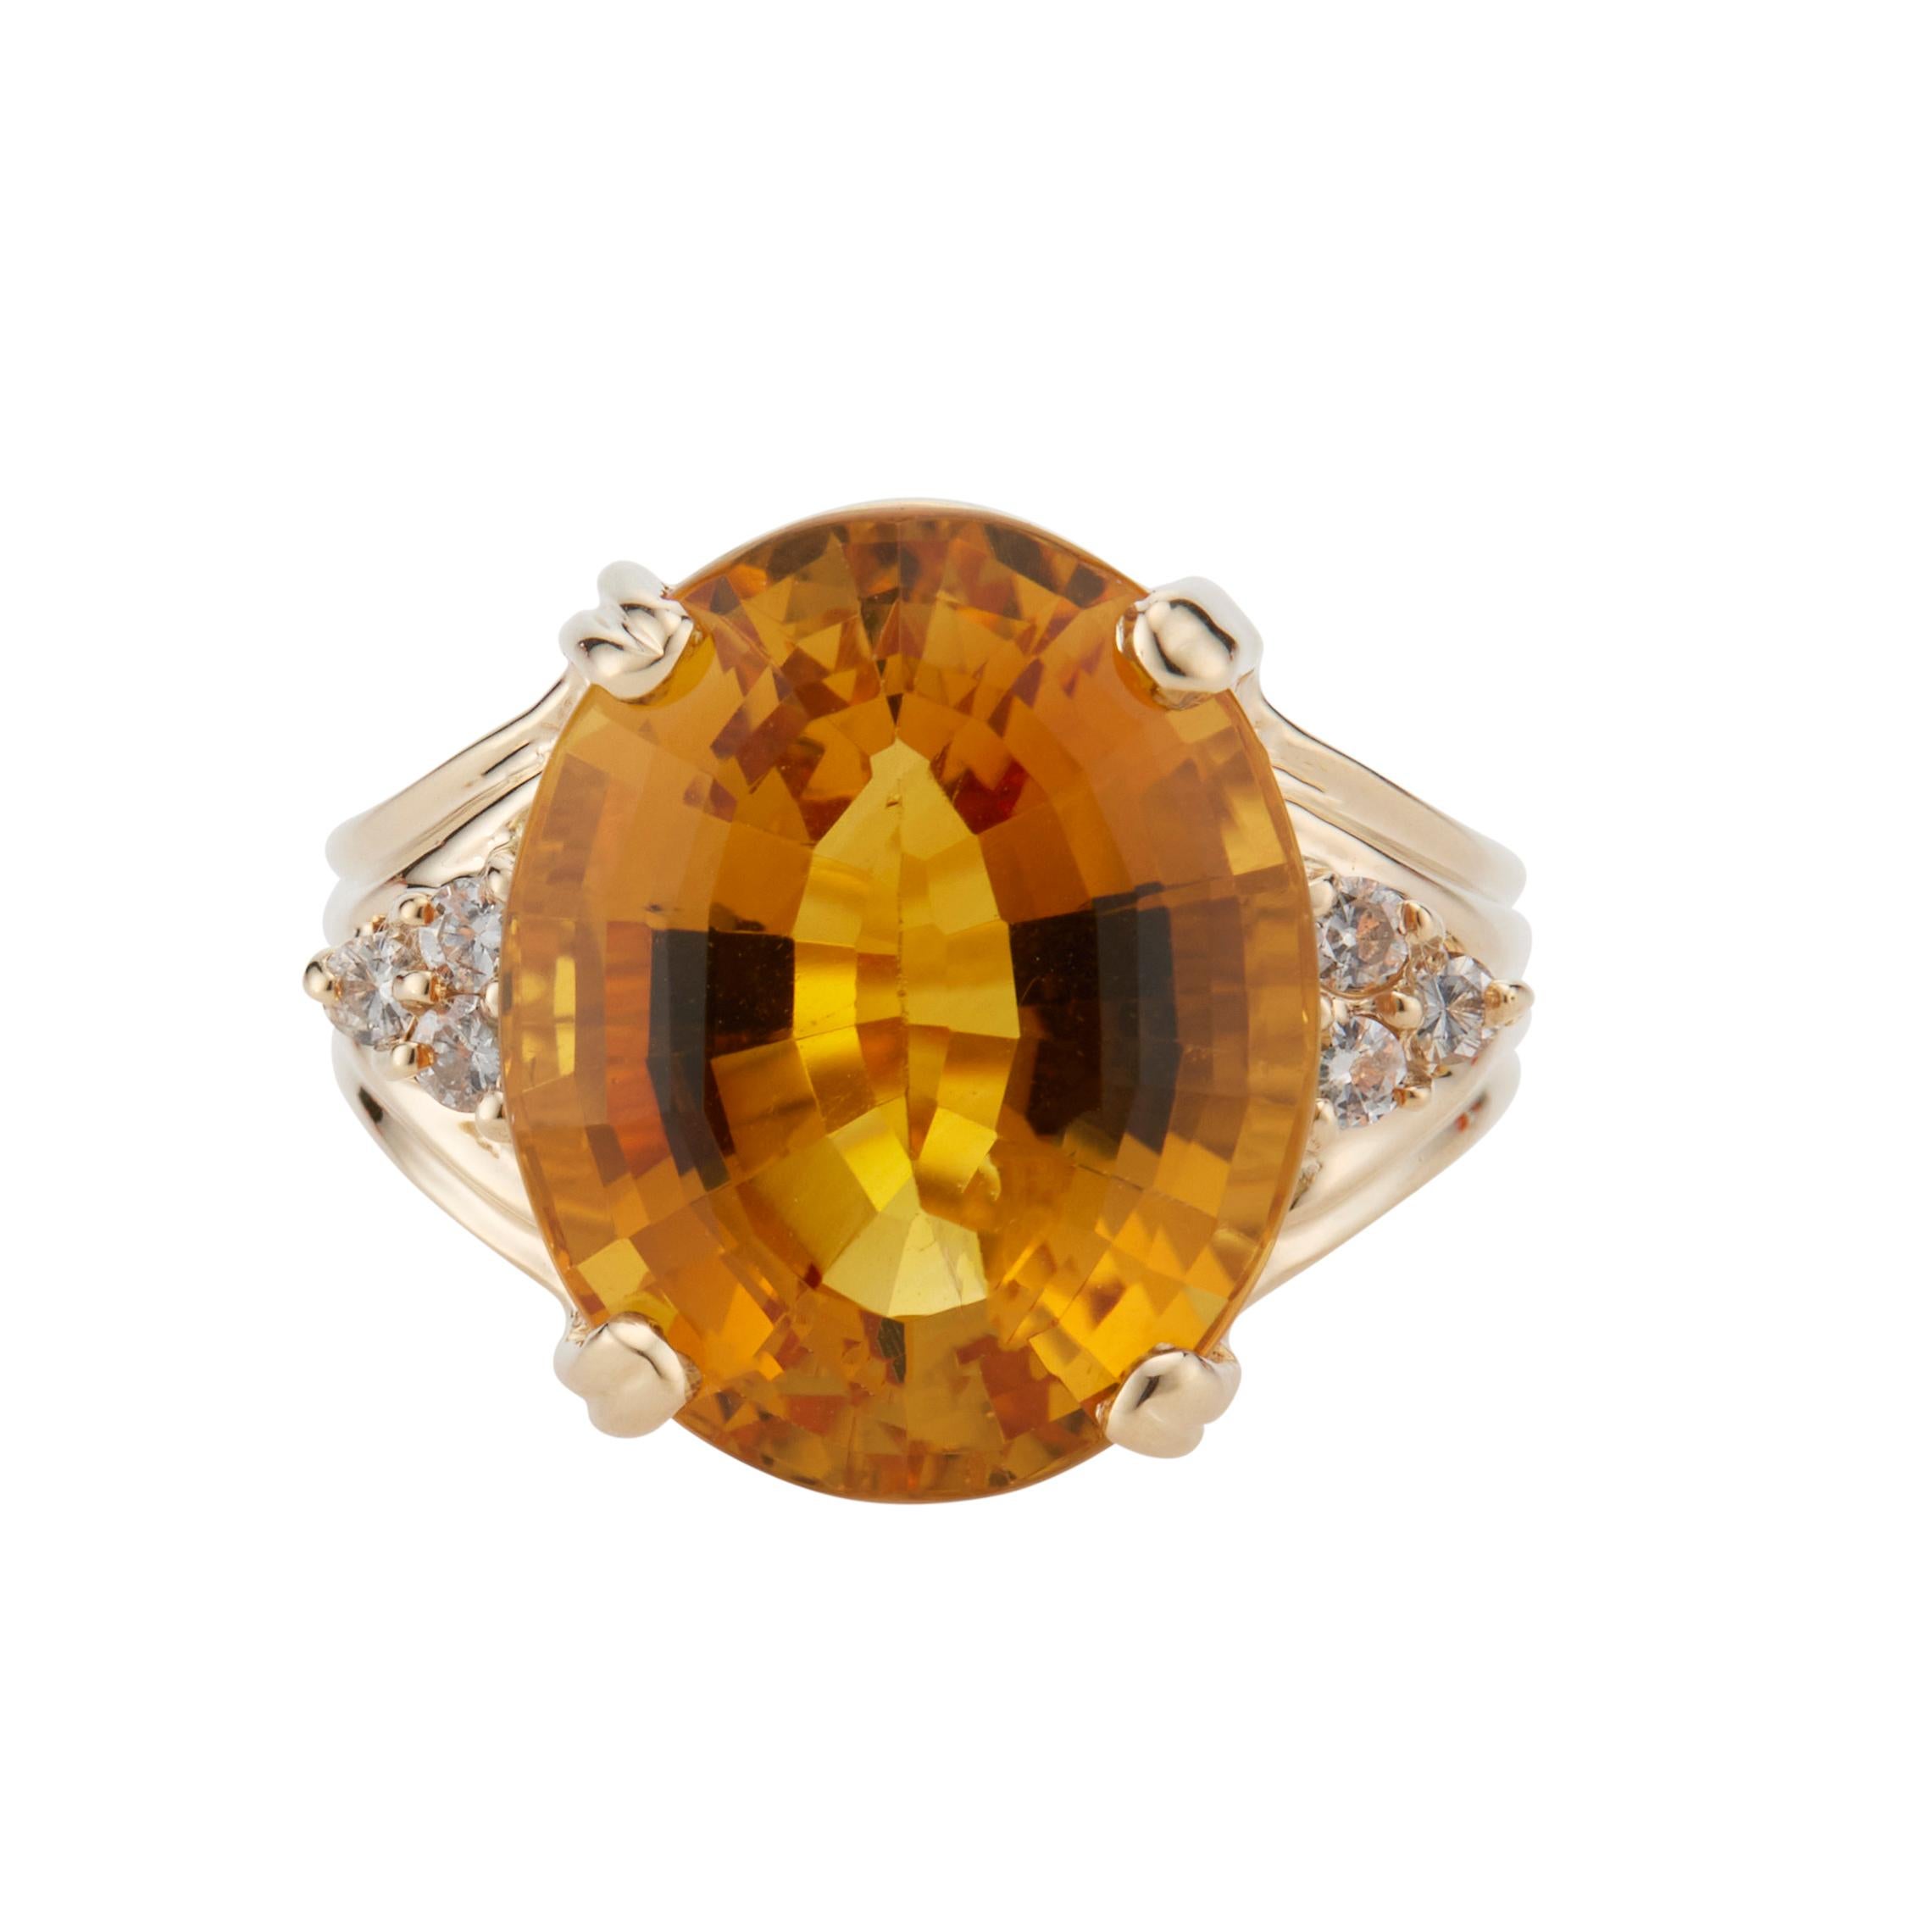 Orange citrine and diamond ring. 14.17ct oval orange/yellow citrine center stone in a 14k yellow gold cocktail setting with 6 round brilliant cut accent diamonds.  

1 oval yellowish orange citrine, VS approx. 14.17cts
6 round brilliant cut